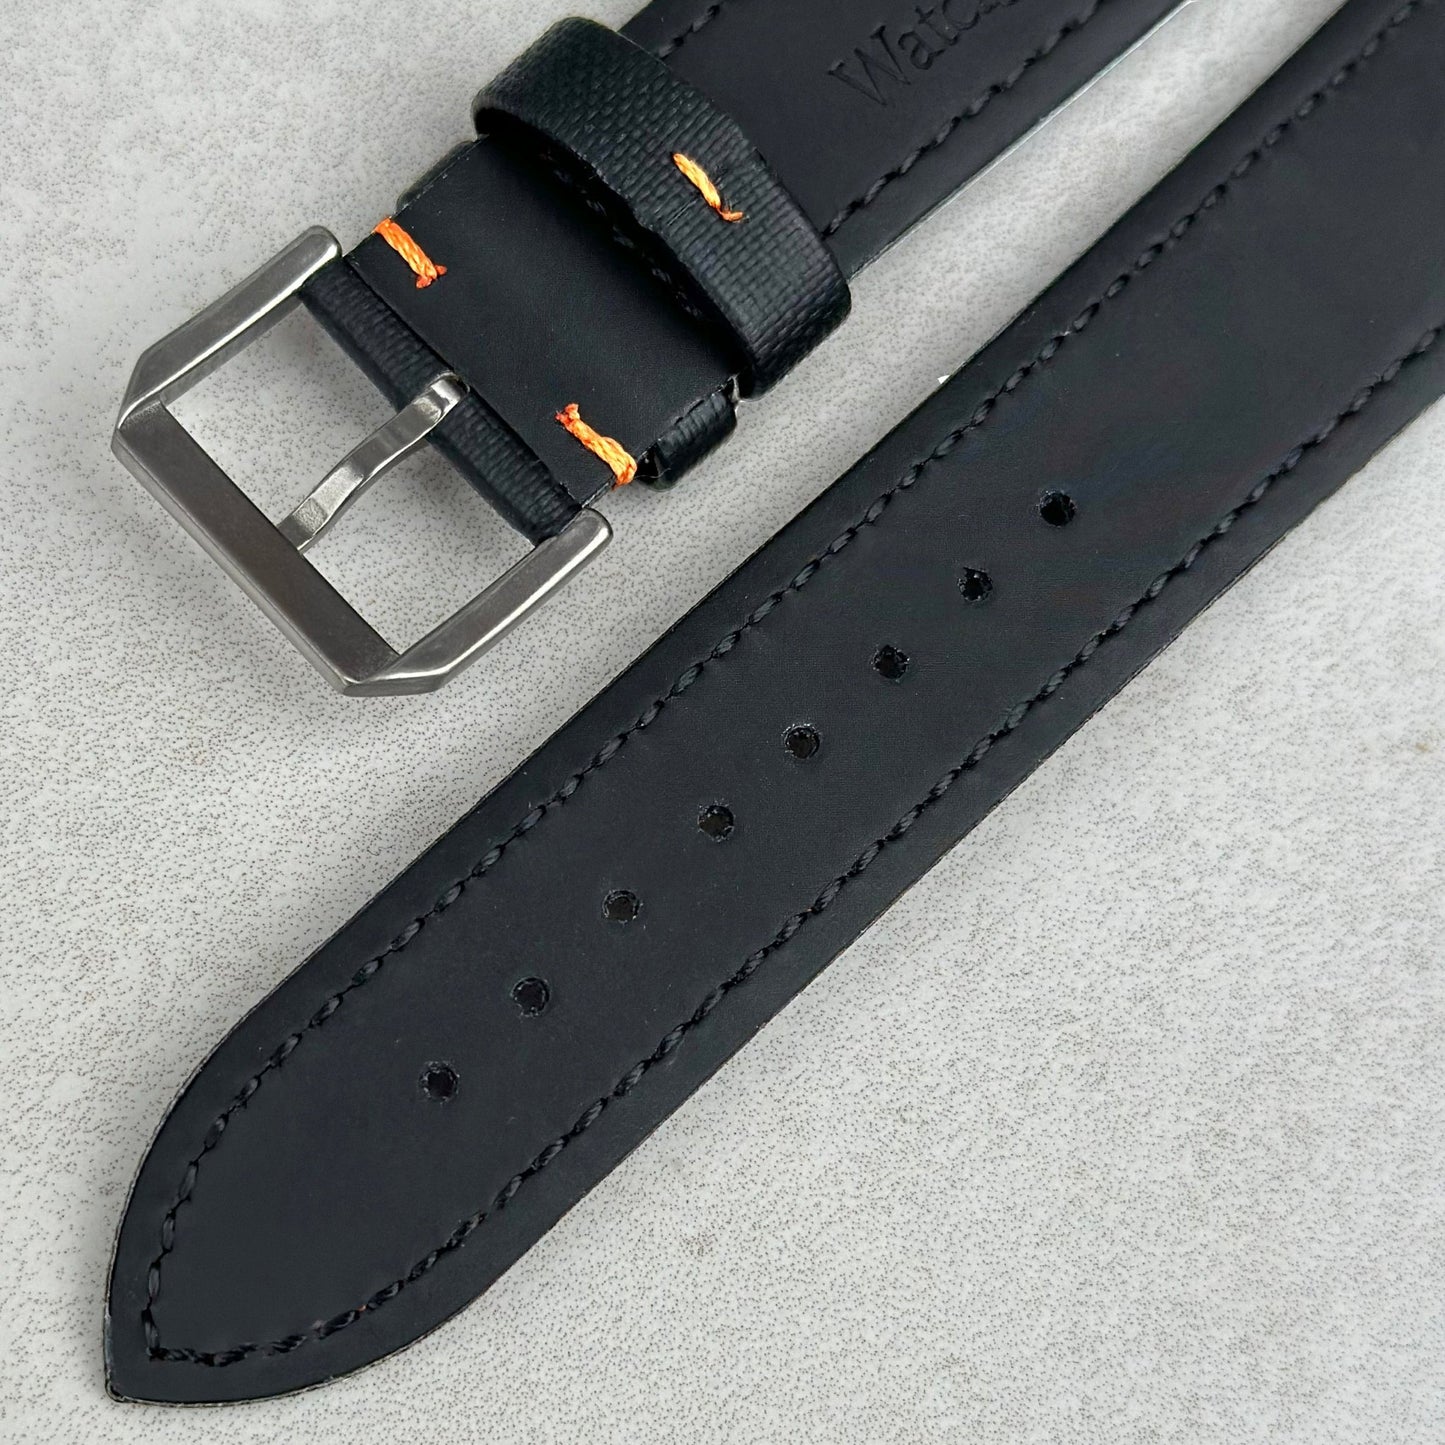 Underside of the brushed 316L stainless steel buckle on the Bermuda jet black sail cloth watch strap with orange stitching.